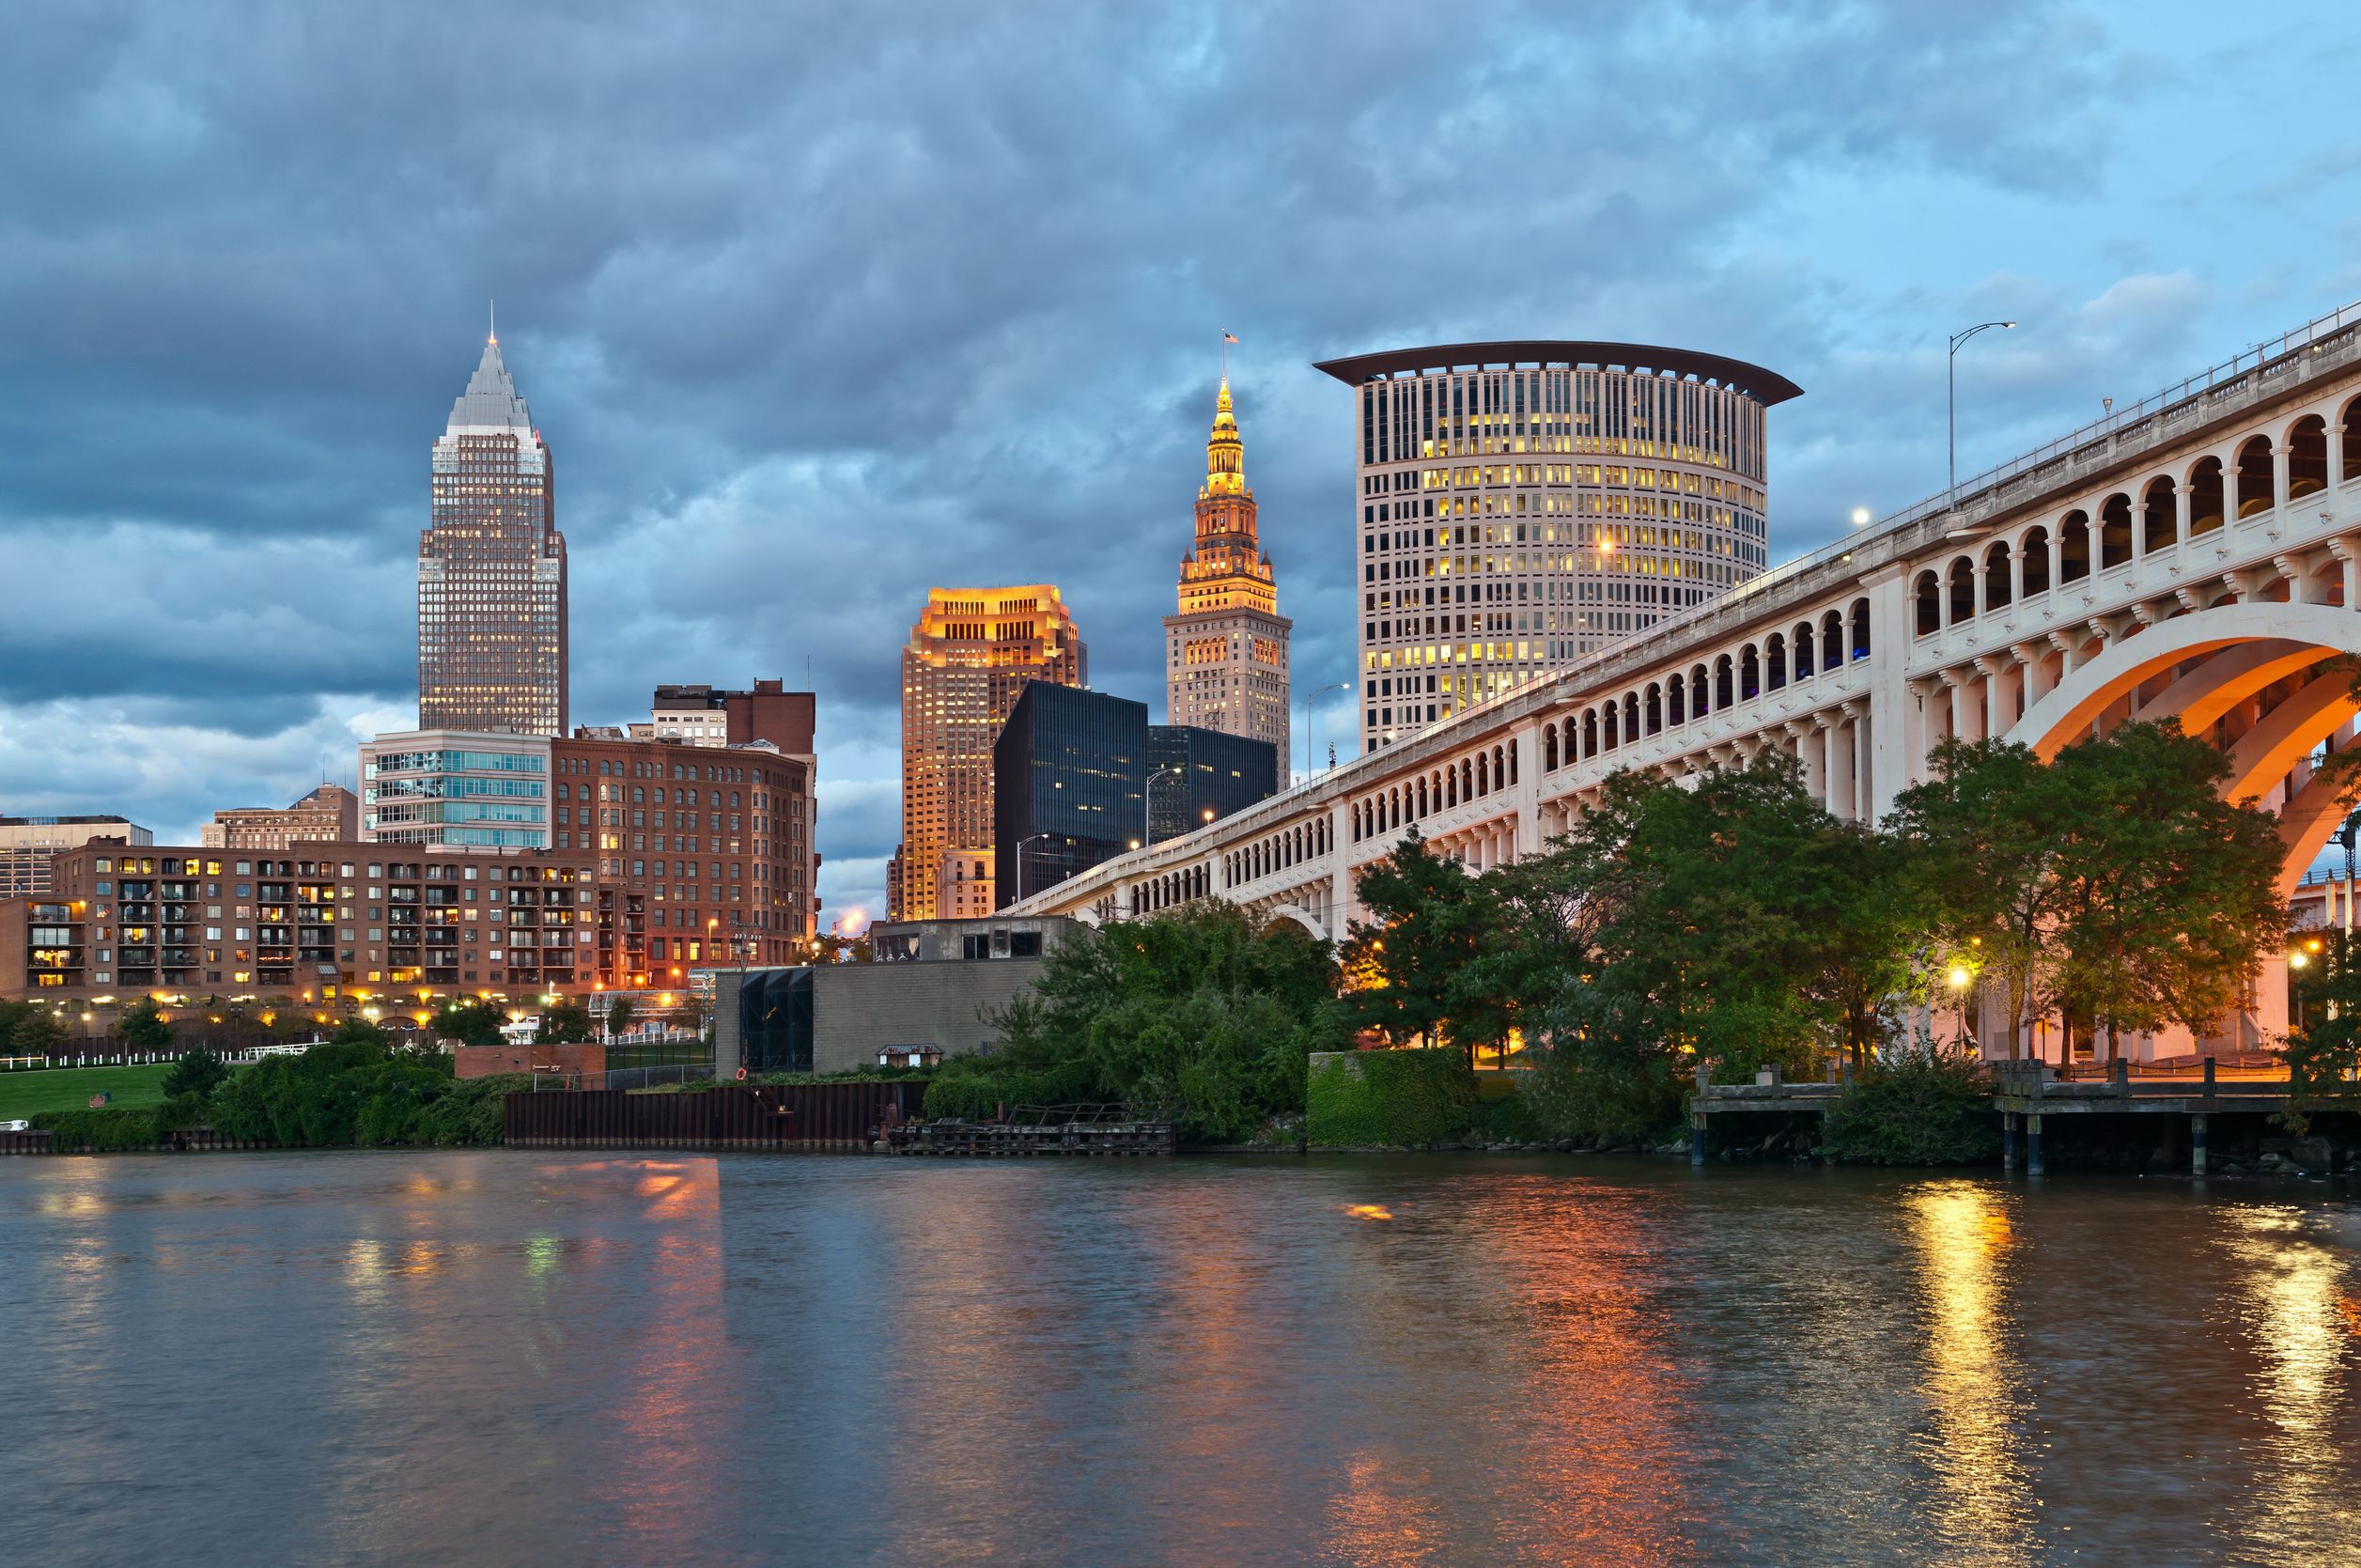 Nice wallpapers Cleveland 2513x1669px